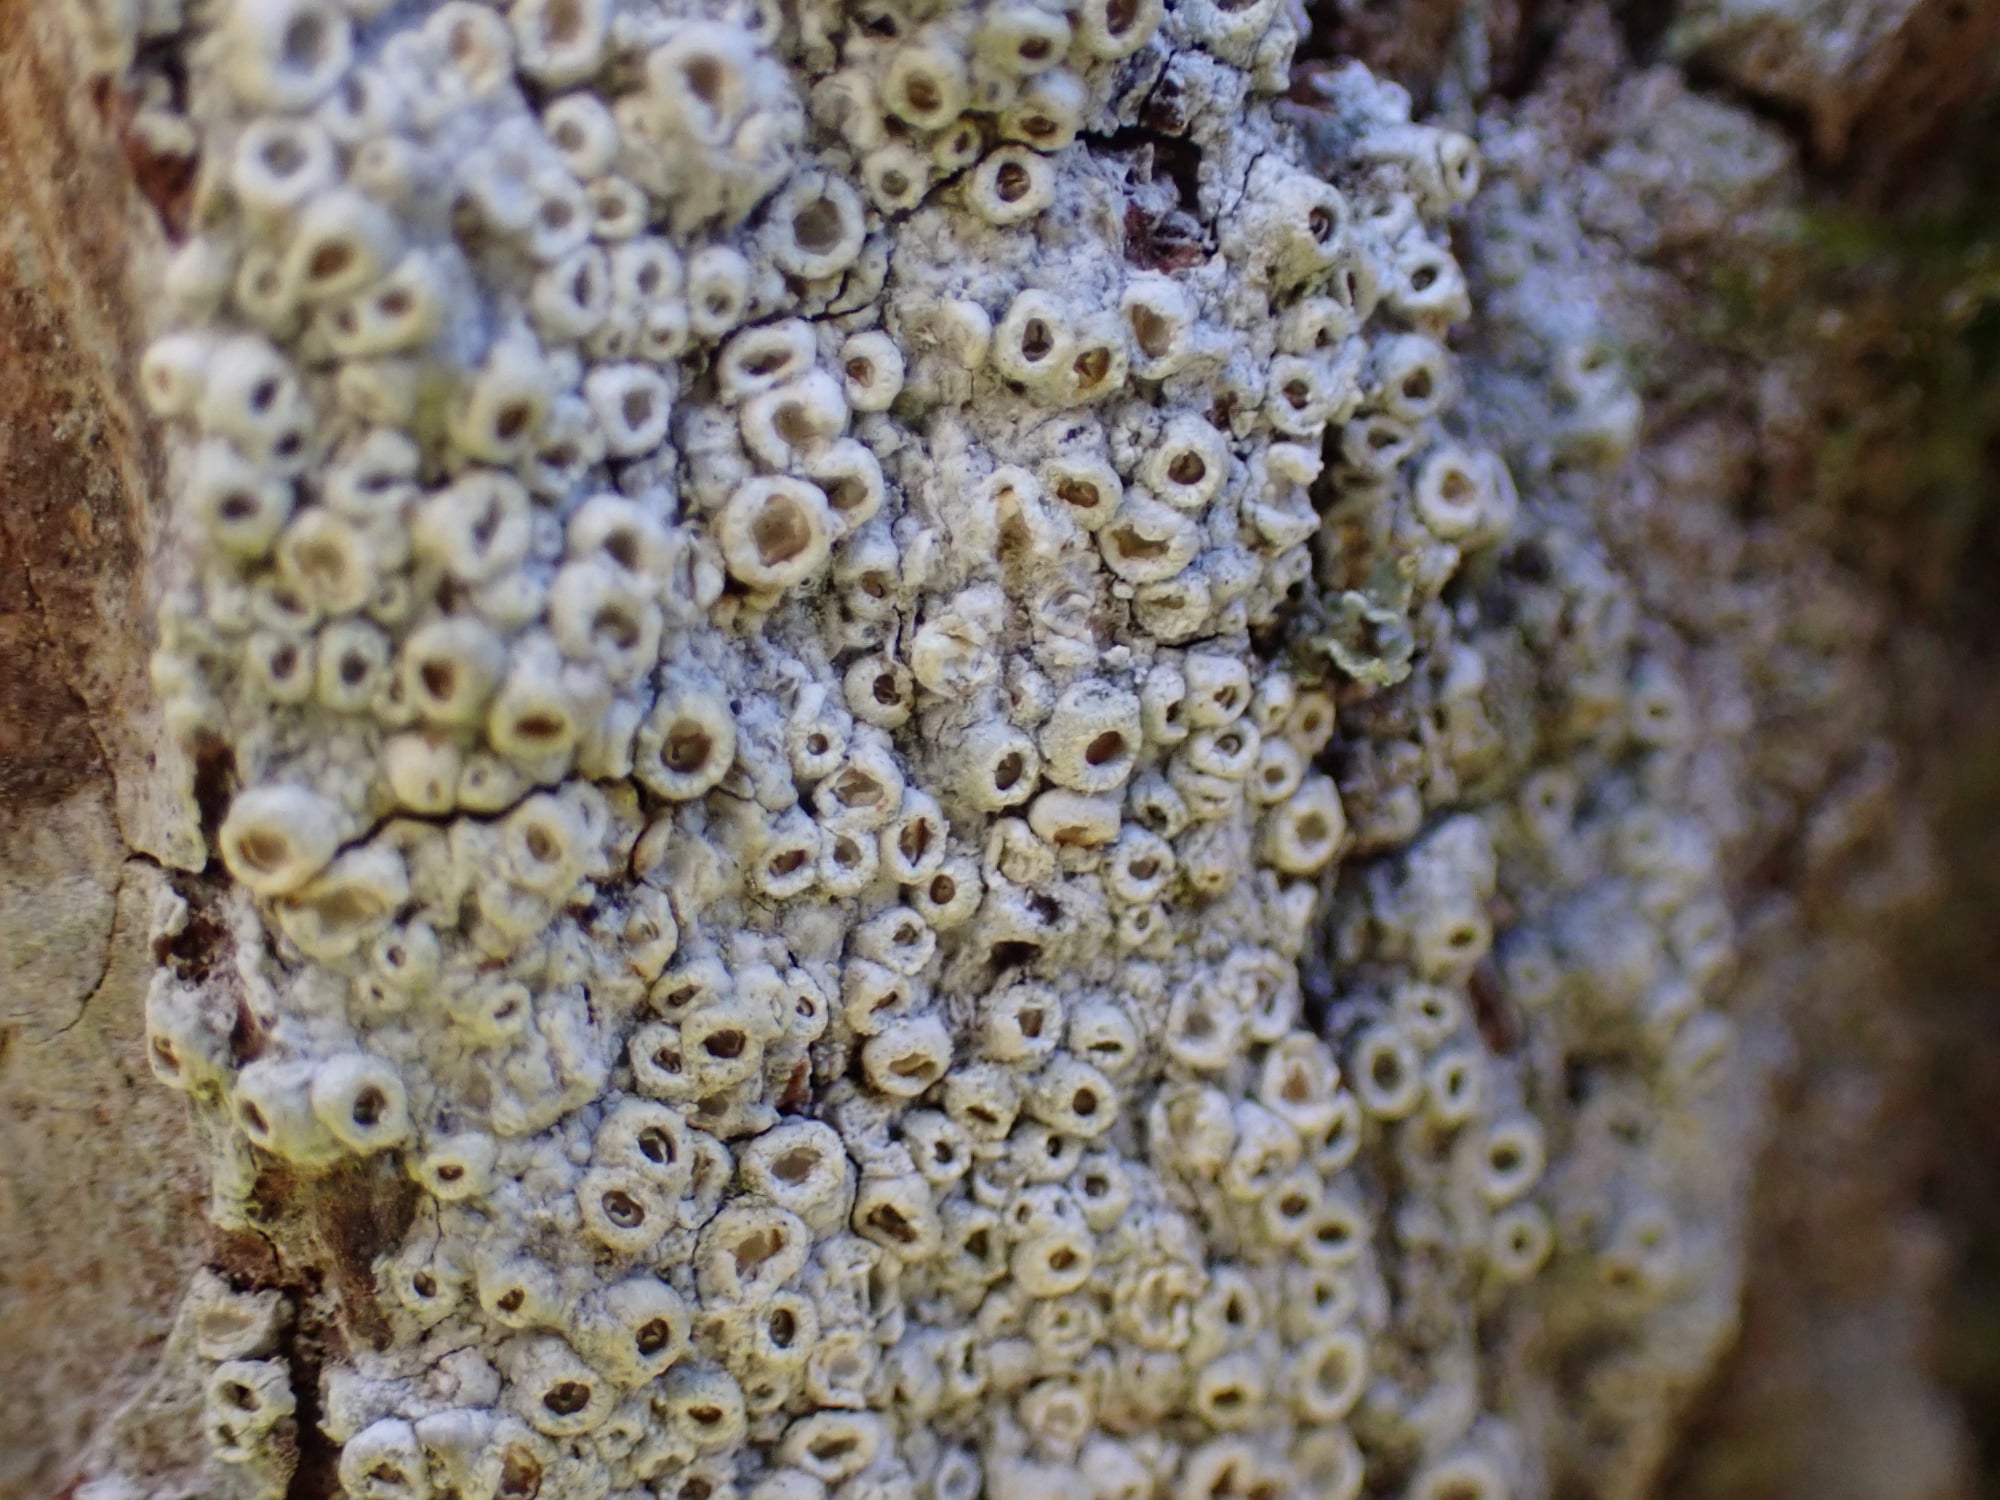 Thelotrema lepadinum on oak with the "inner lining" visible in several apothecia